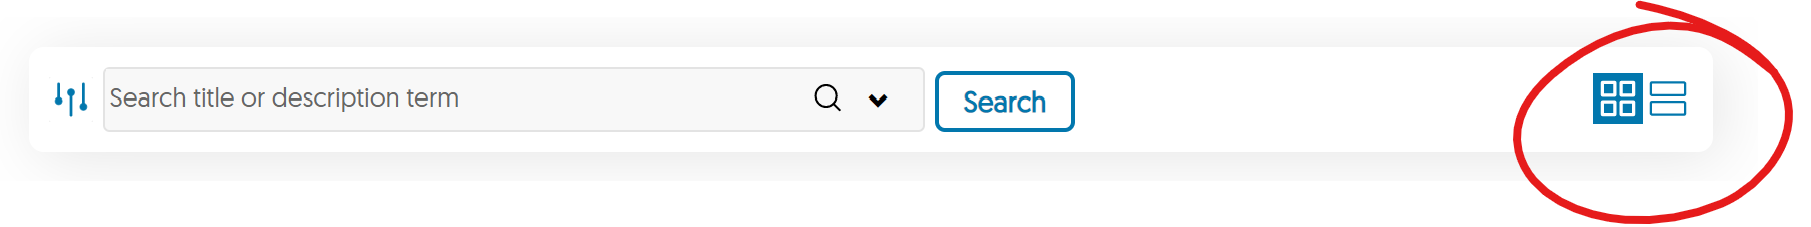 media search options